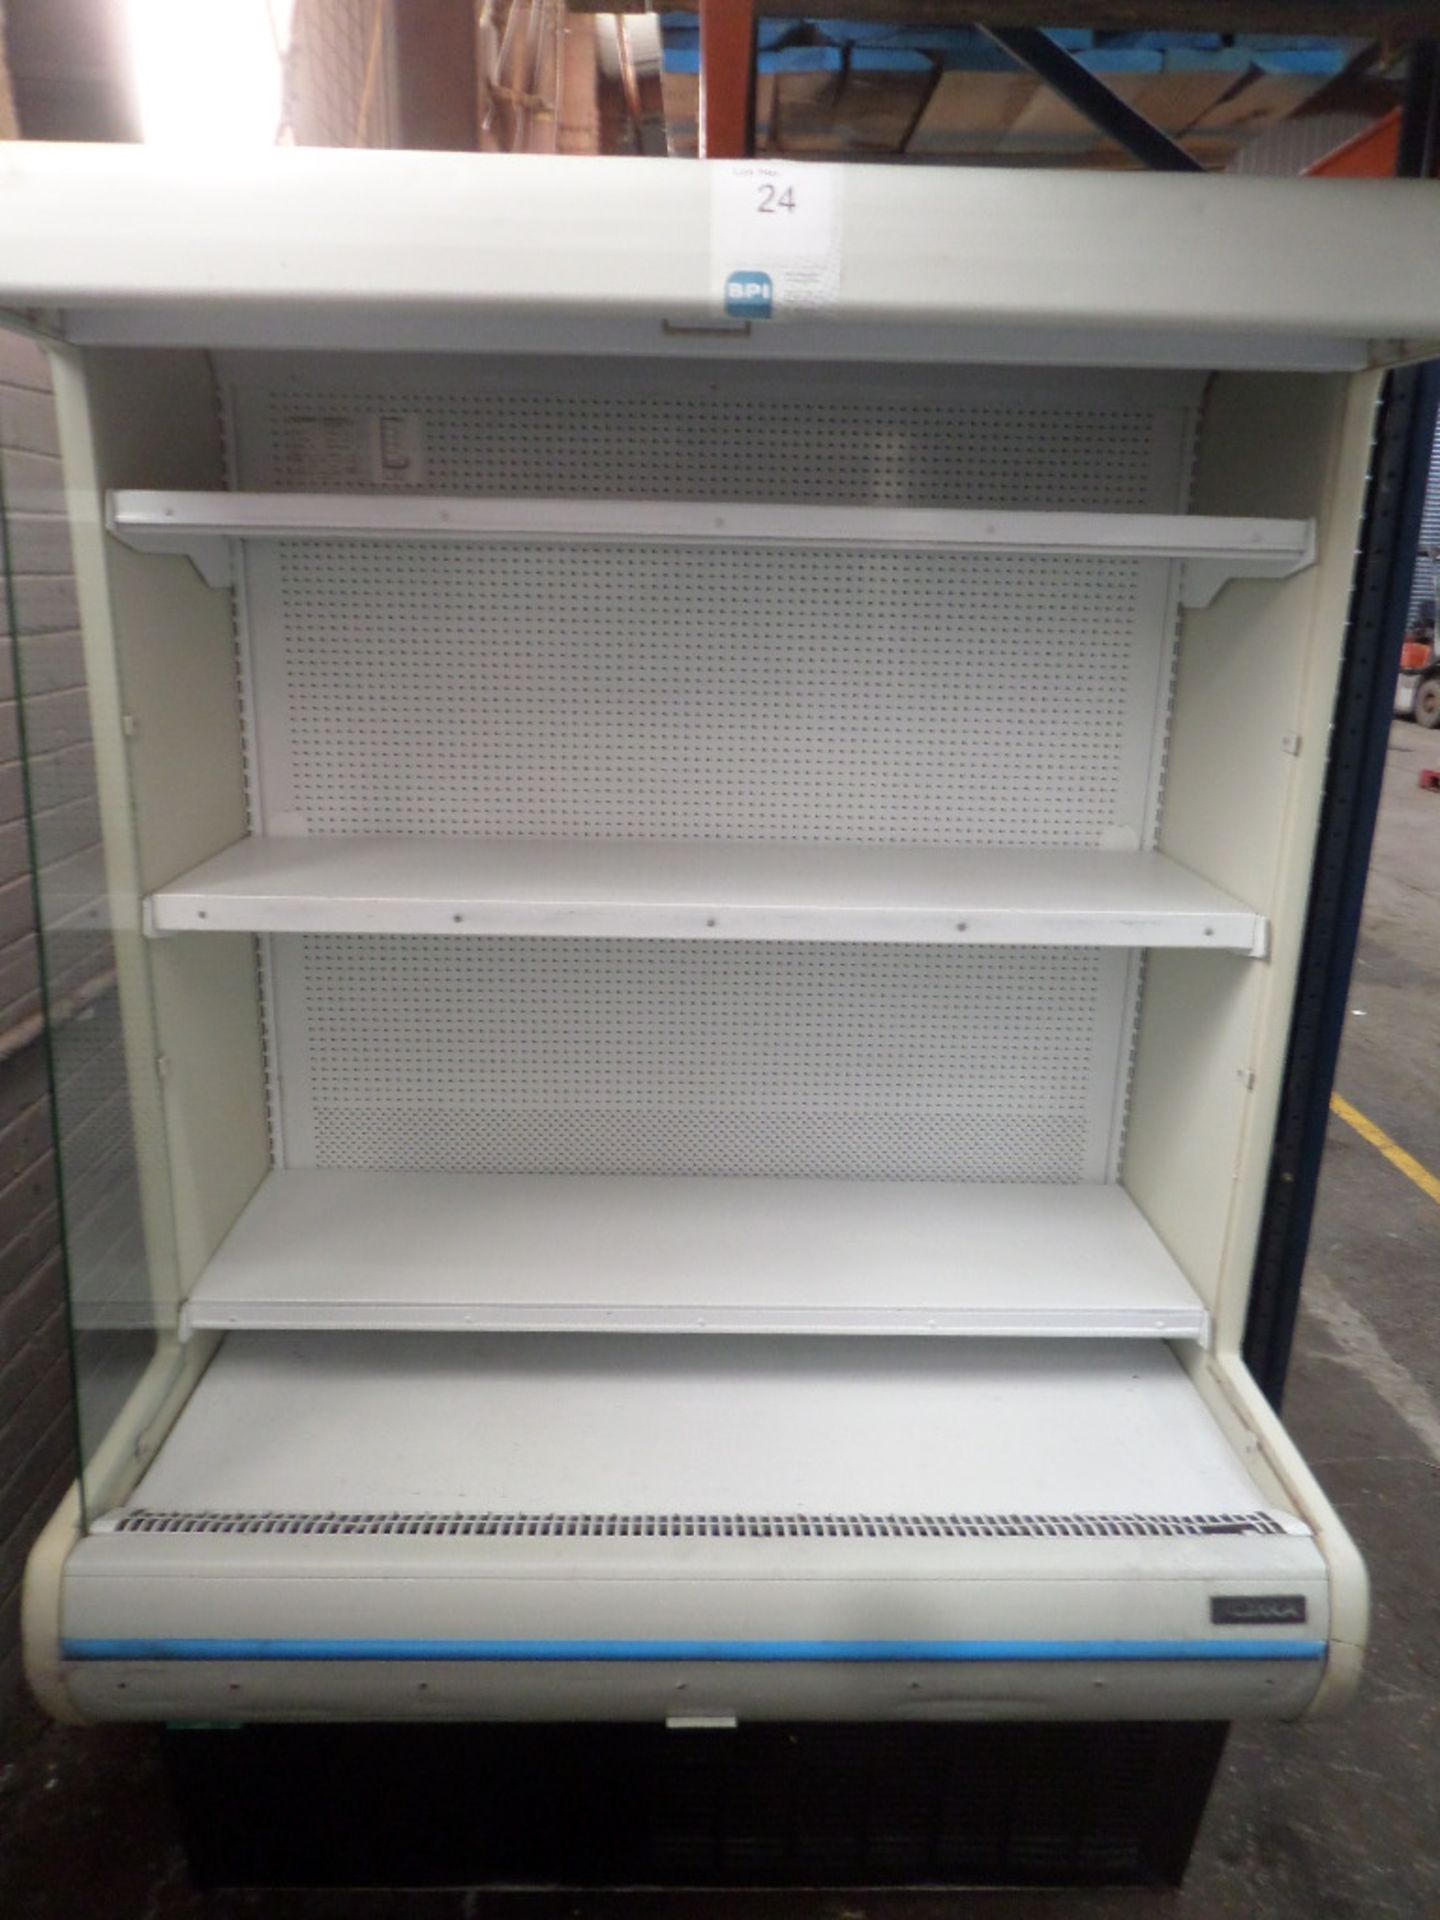 KOXKA M-14 {016961} 6FT MULTI DECK DISPLAY FRIDGE 240v 13amp connection and is fitted with lighting